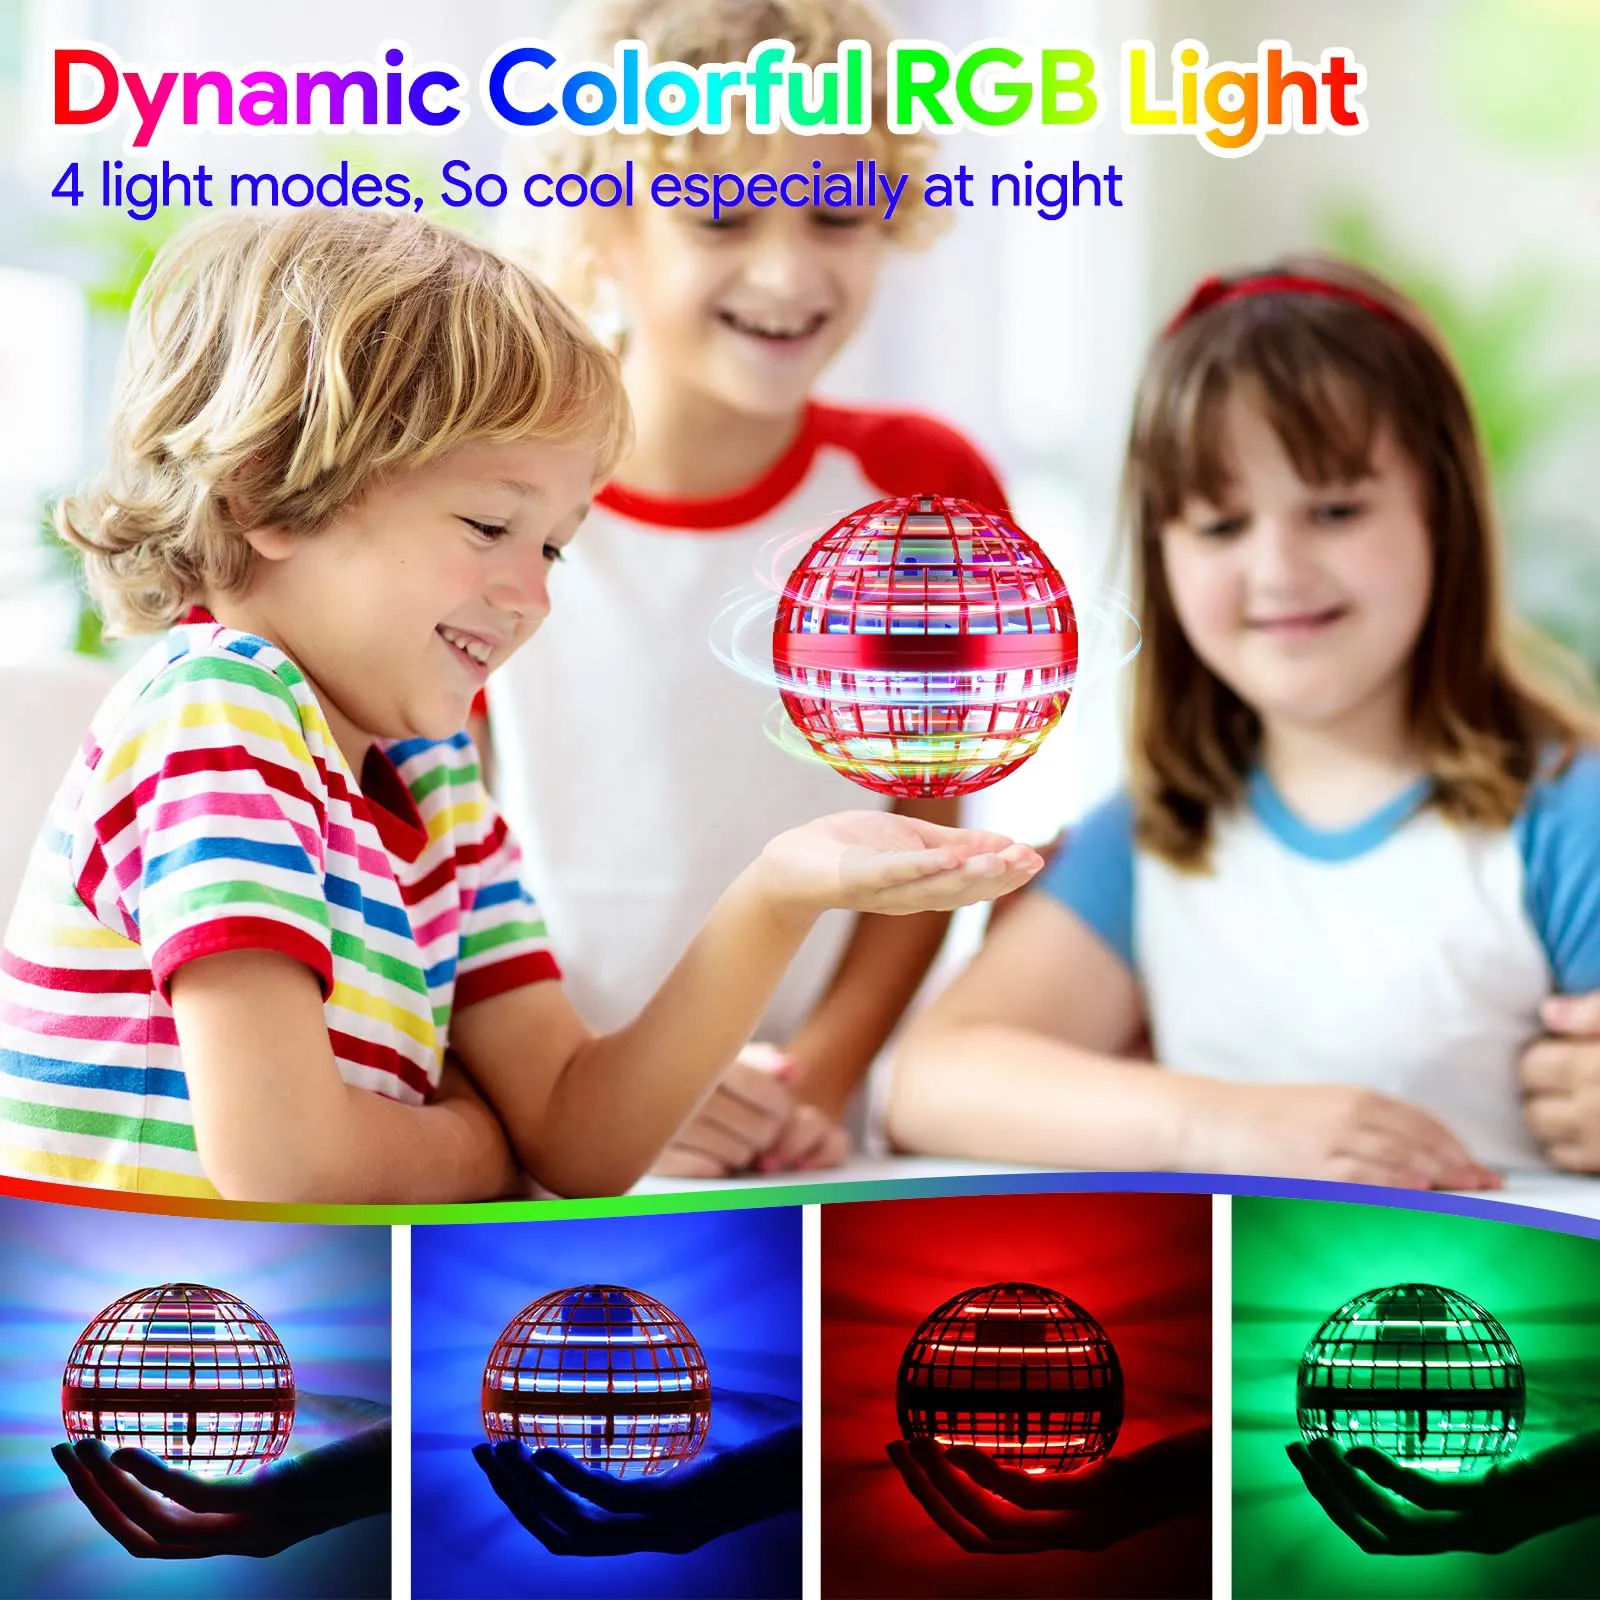 magic flying orb ball toy with light 2022 upgraded hover orb ball hand controlled flying spinner mini drone ball boomerang orb birthday gift for 6 7 8 9 10add year old kids adults indoor outdoorred